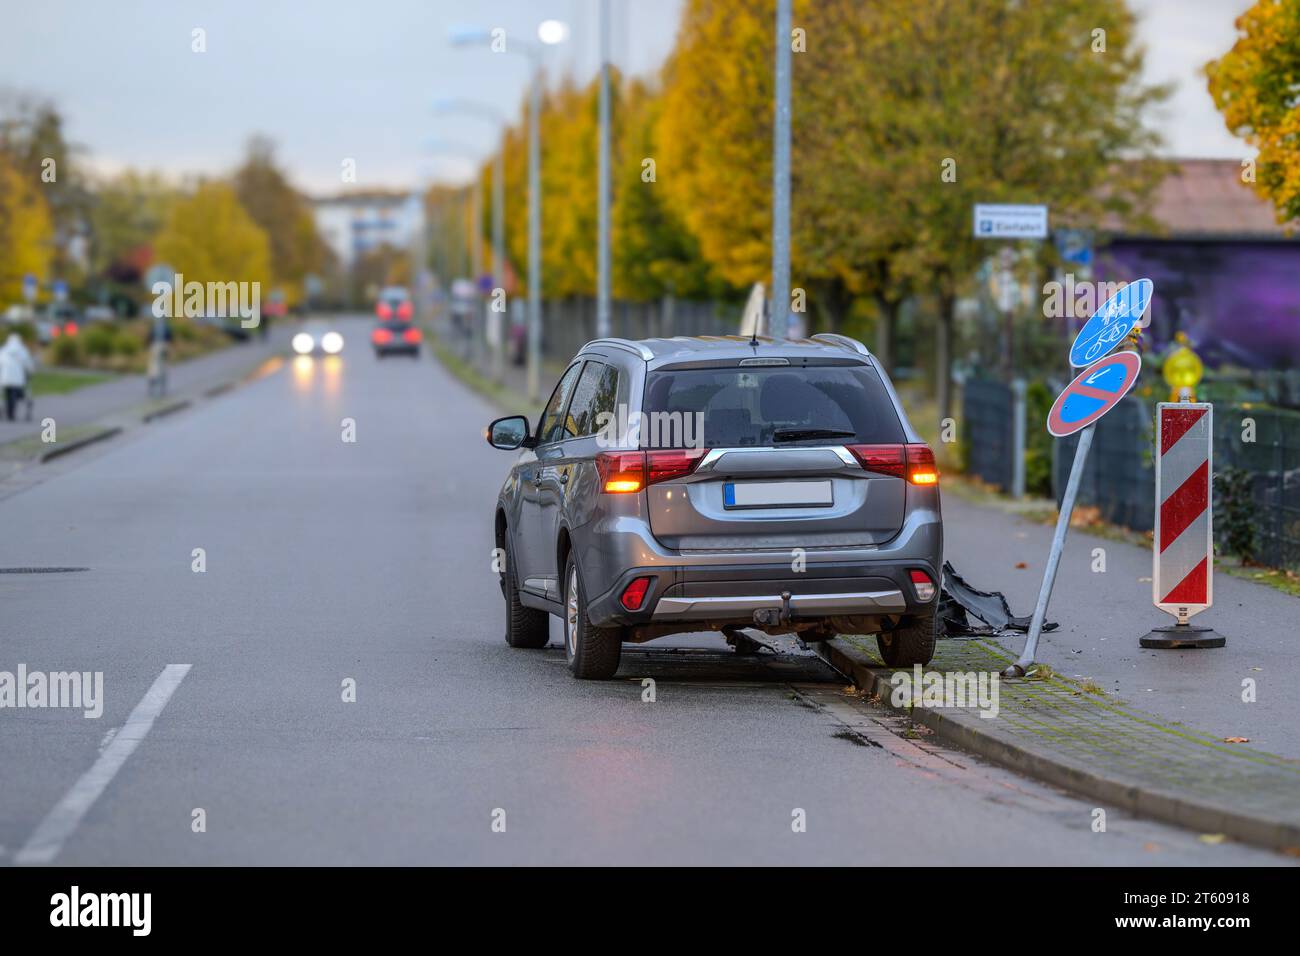 A car has knocked down a traffic sign Stock Photo